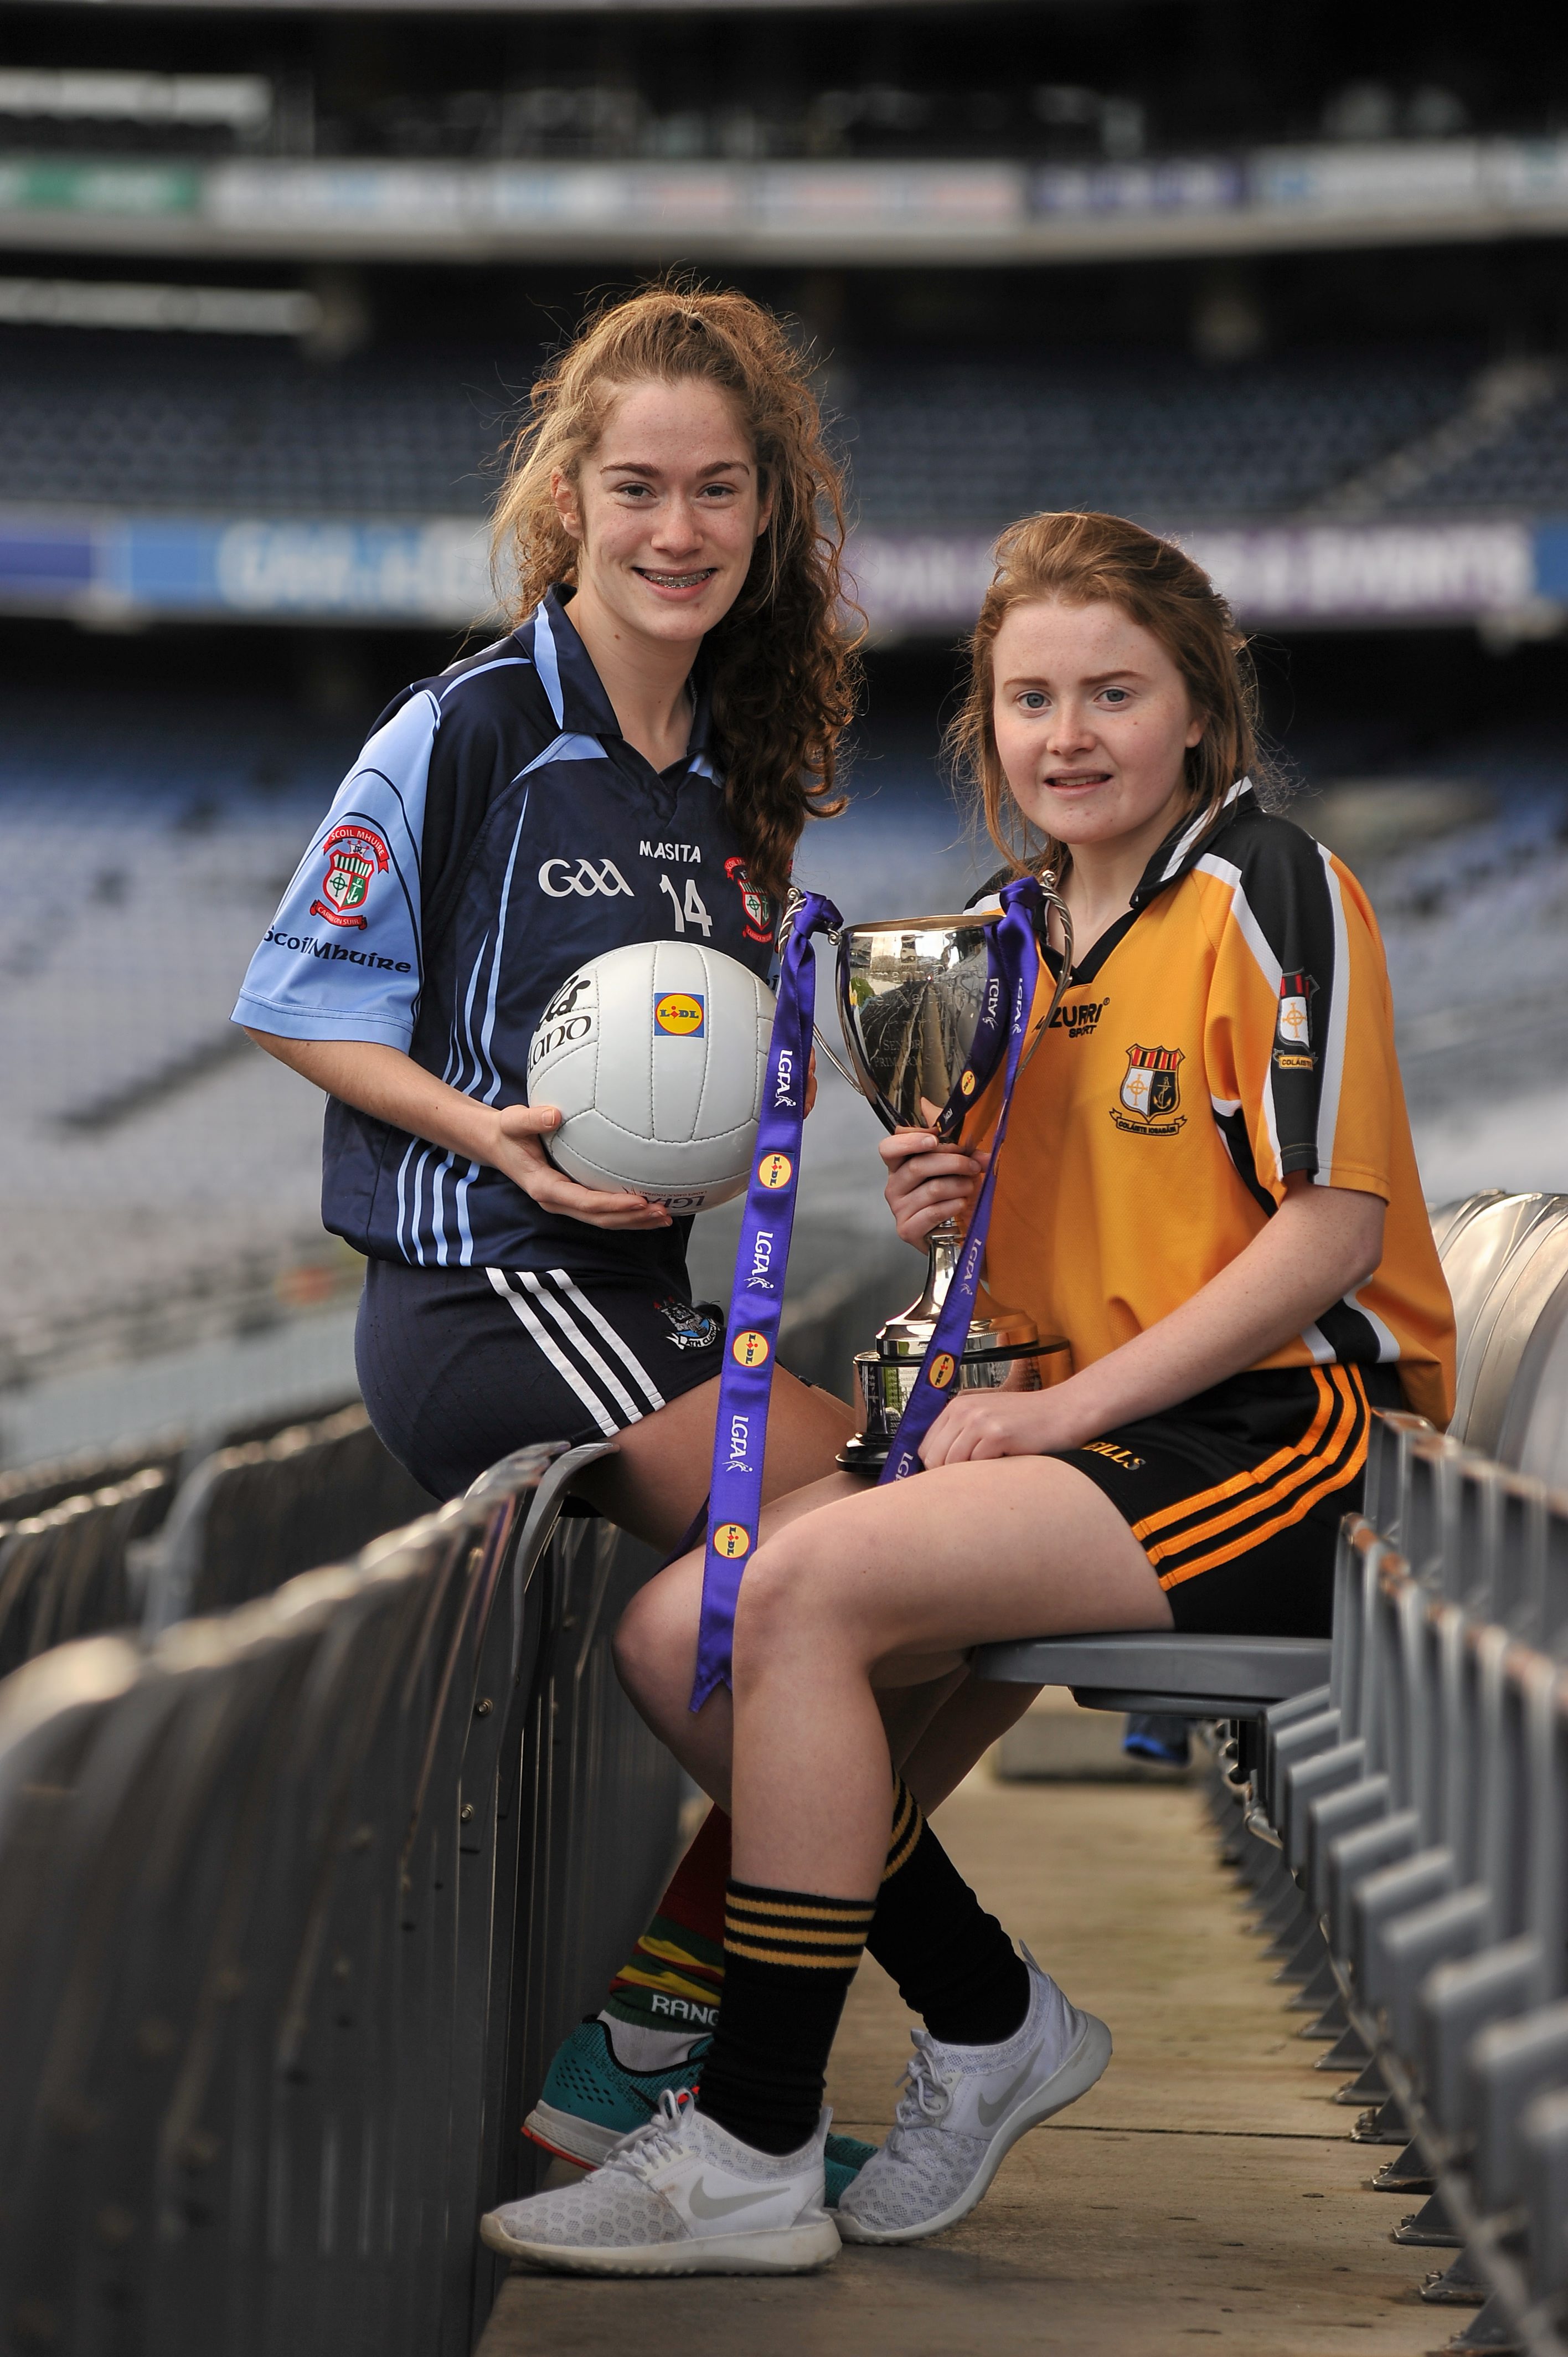 1 March 2016; The Lidl All Ireland Post Primary Schools Finals were launched today at Croke Park. The finals will be contested at Senior and Junior level with 3 finals at each grade. Scoil Mhuire, Carrick on Suir, Tipperary, will meet the 2014 Champions, Coláiste Íosagáin in the Lidl PPS Senior A All Ireland Final. John the Baptist from Limerick will meet Holy Rosary College from Mountbellew in Galway in the Senior B Final with Gallen C.S Ferbane taking on Scoil Phobail Sliabh Luachra from Kerry in the Senior C final. The Lidl PPS All Ireland Junior A Final will see Scoil Críost Rí from Portlaoise meeting St. Ronans College from Armagh. Killorglin from Kerry will meet the Presentation College from Tuam in the Lidl Junior B PPS All Ireland Final and Scoil Phobal Sliabh Luachra, Kerry, will meet Mercy S.S from Ballymahon in Longford in the Junior C decider. Full details for the finals including venues and throw in times are available from www.ladiesgaelic.ie. Pictured are Meave Phelan, Scoil Chríost Rí, Portlaoise, Co. Laois, and Megan McCann, St Ronan's College Lurgan, Co. Armagh. Croke Park, Dublin. Picture credit: Sam Barnes / SPORTSFILE *** NO REPRODUCTION FEE ***